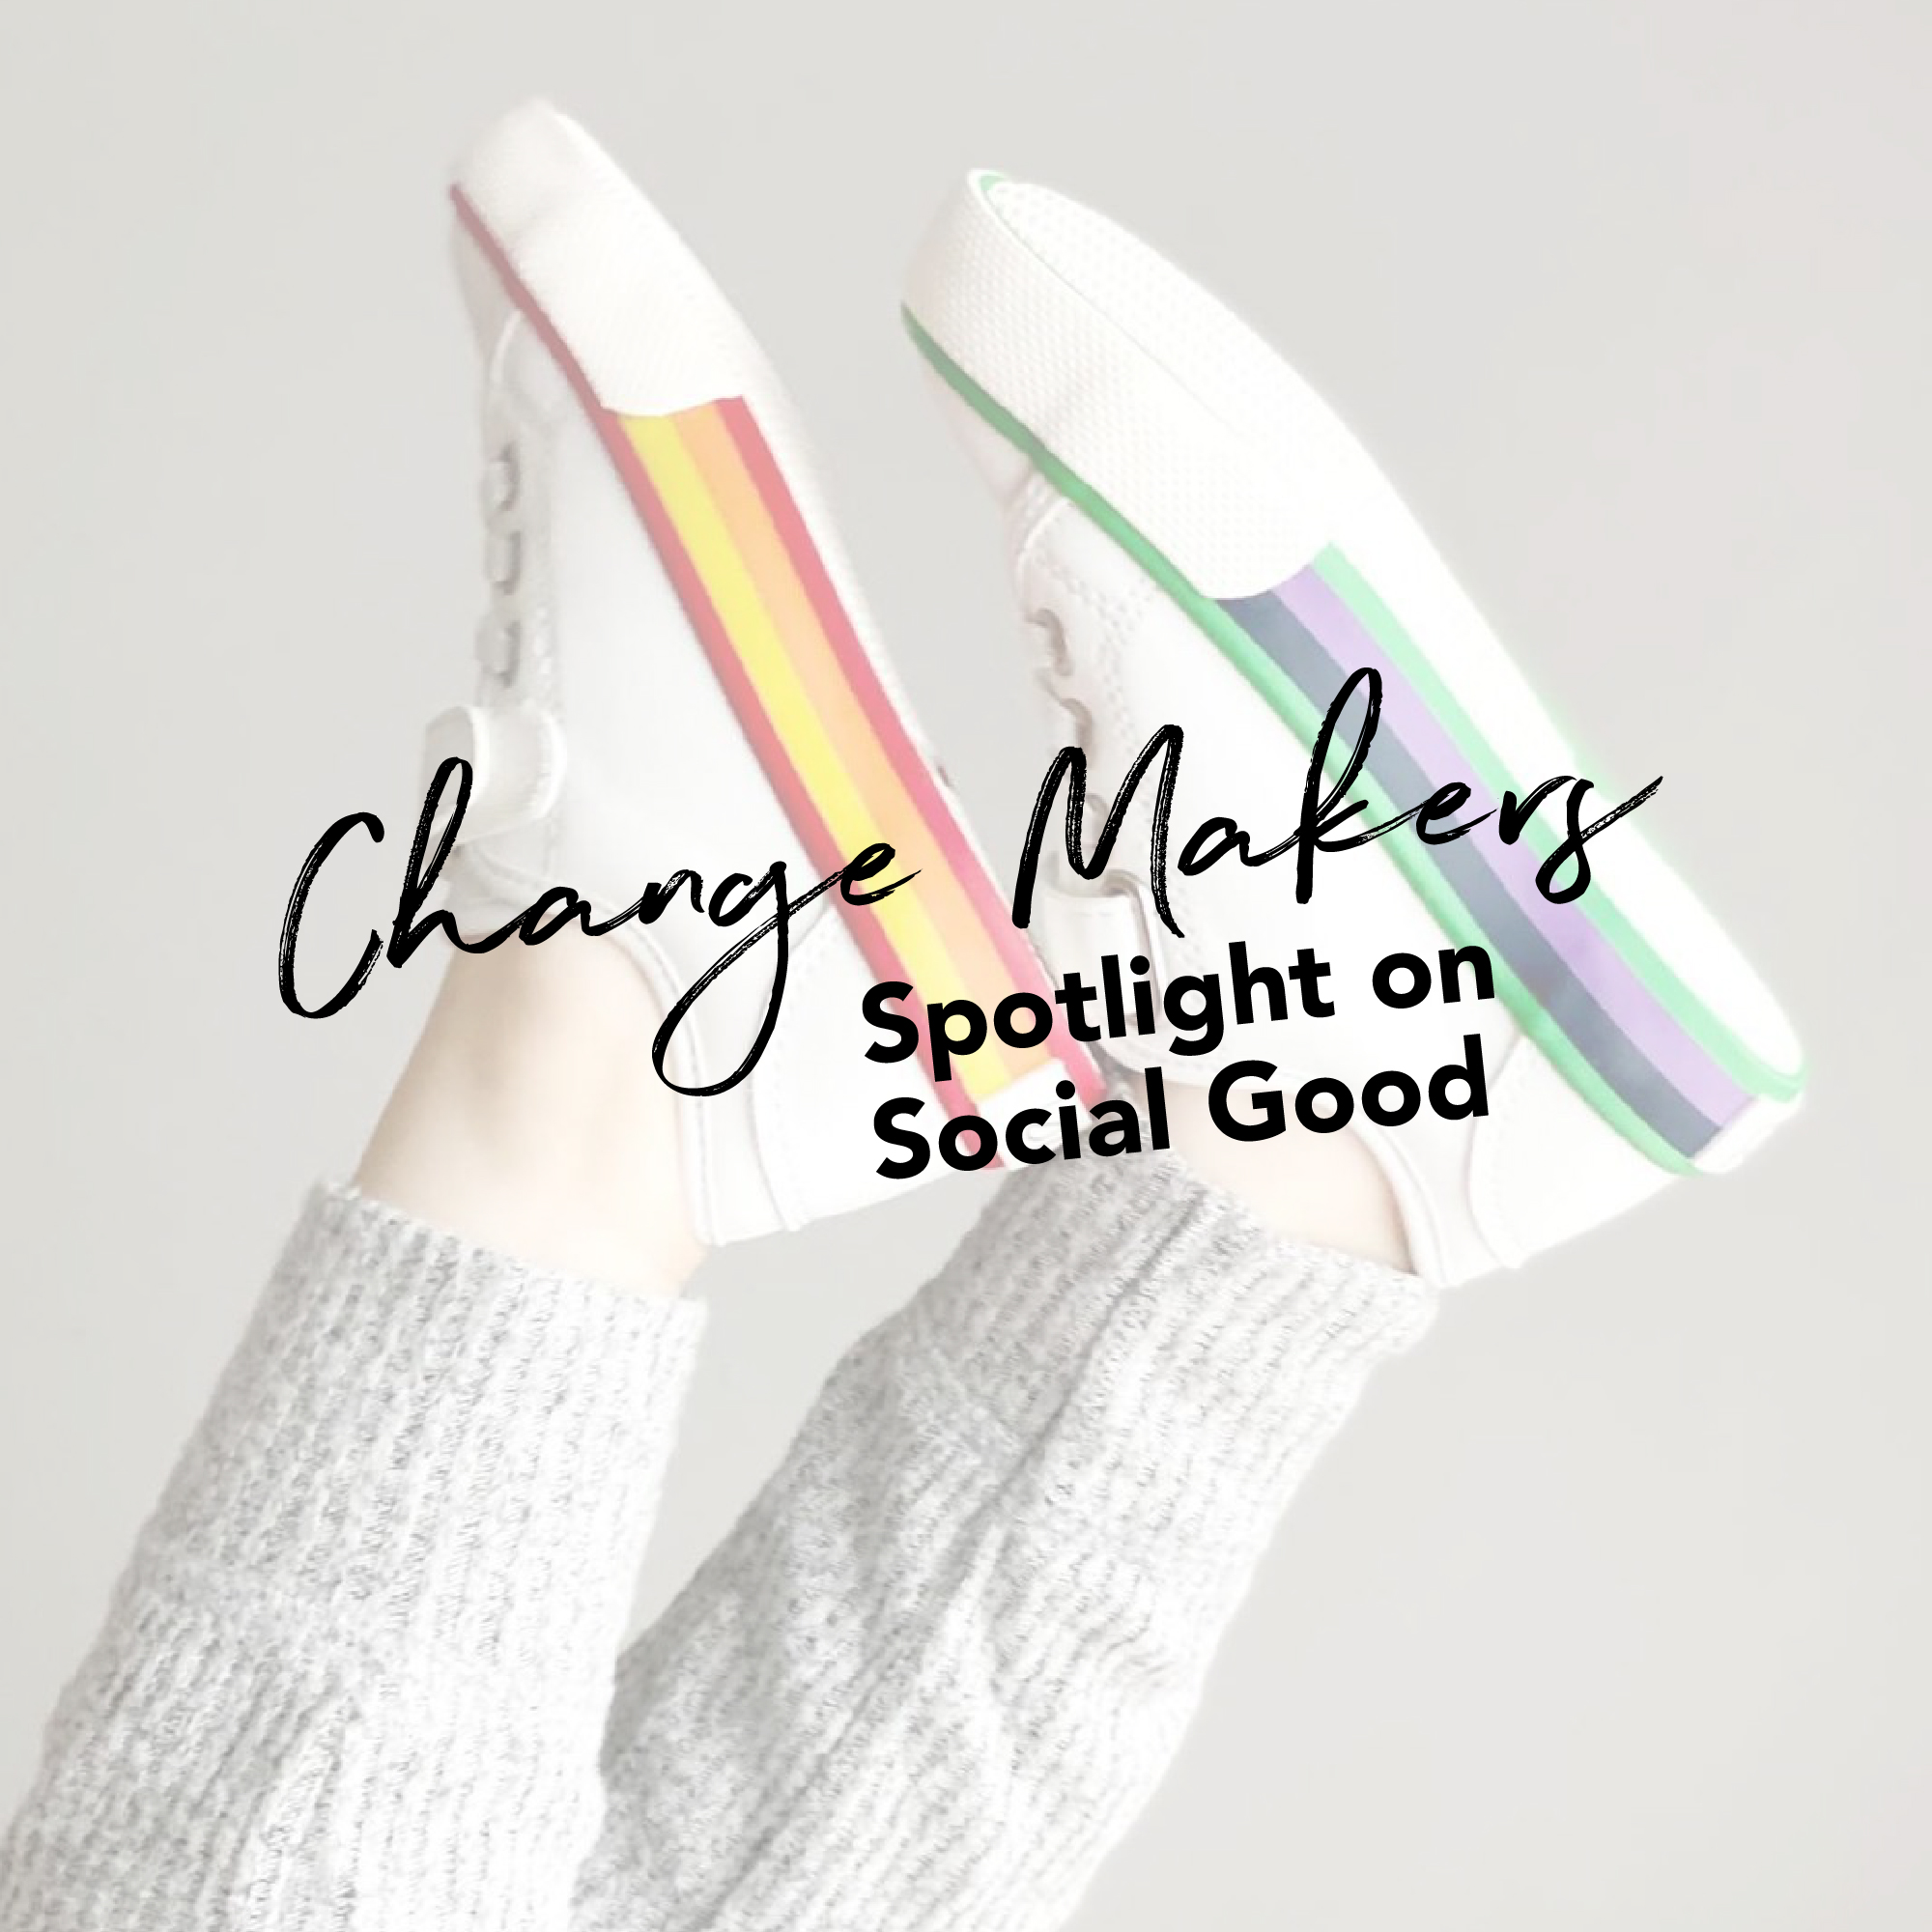 legs with pants on and colorful sneakers in the air - text overlay with change makers spotlight on social good.